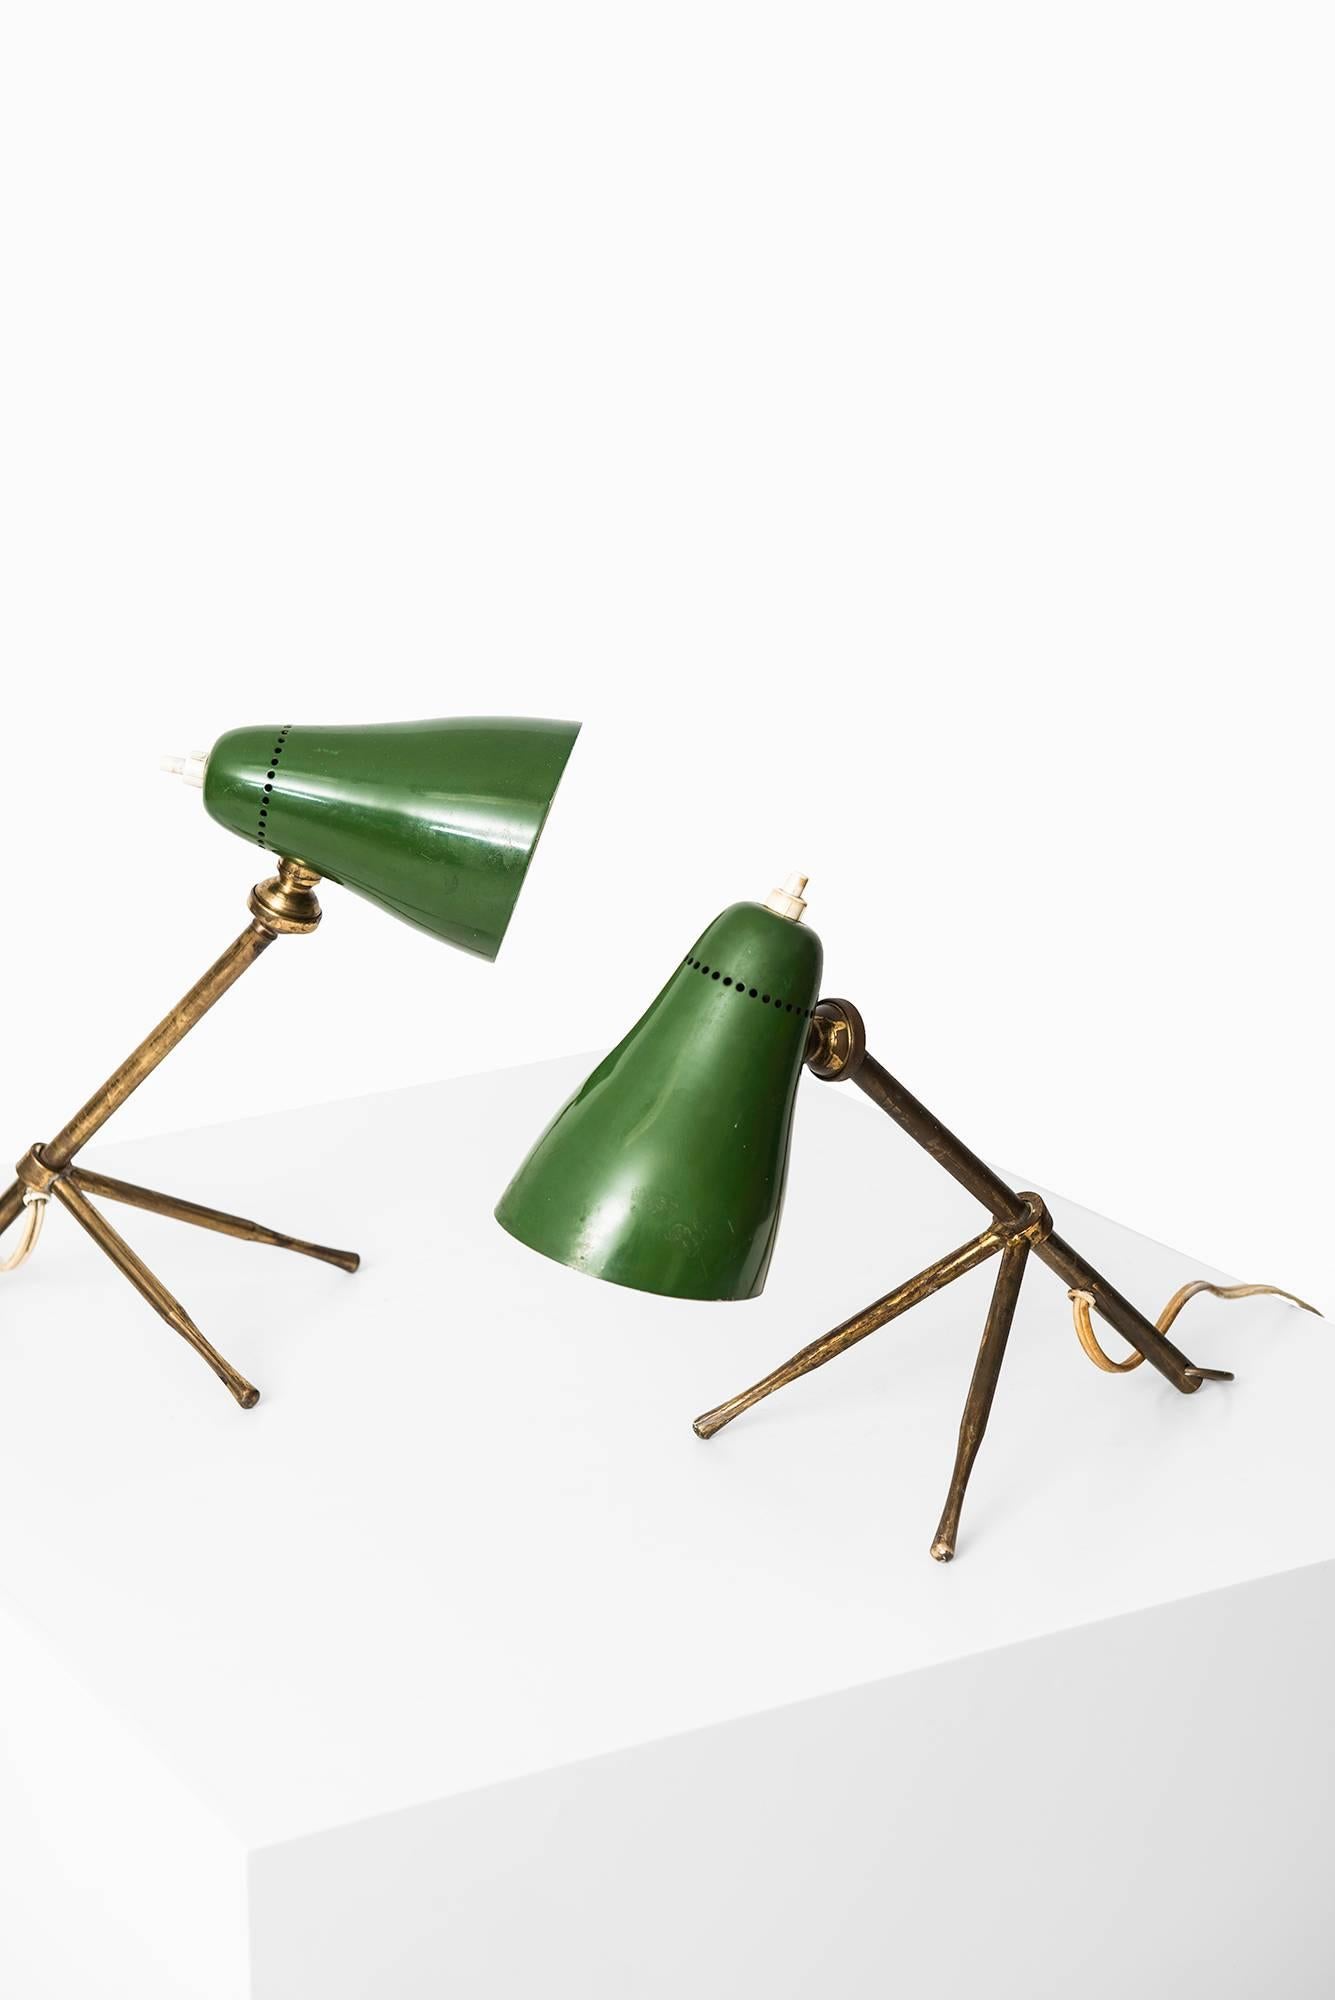 Rare pair of table lamps model Ochetta designed by Giuseppe Ostuni. Produced by O-Luce in Italy.